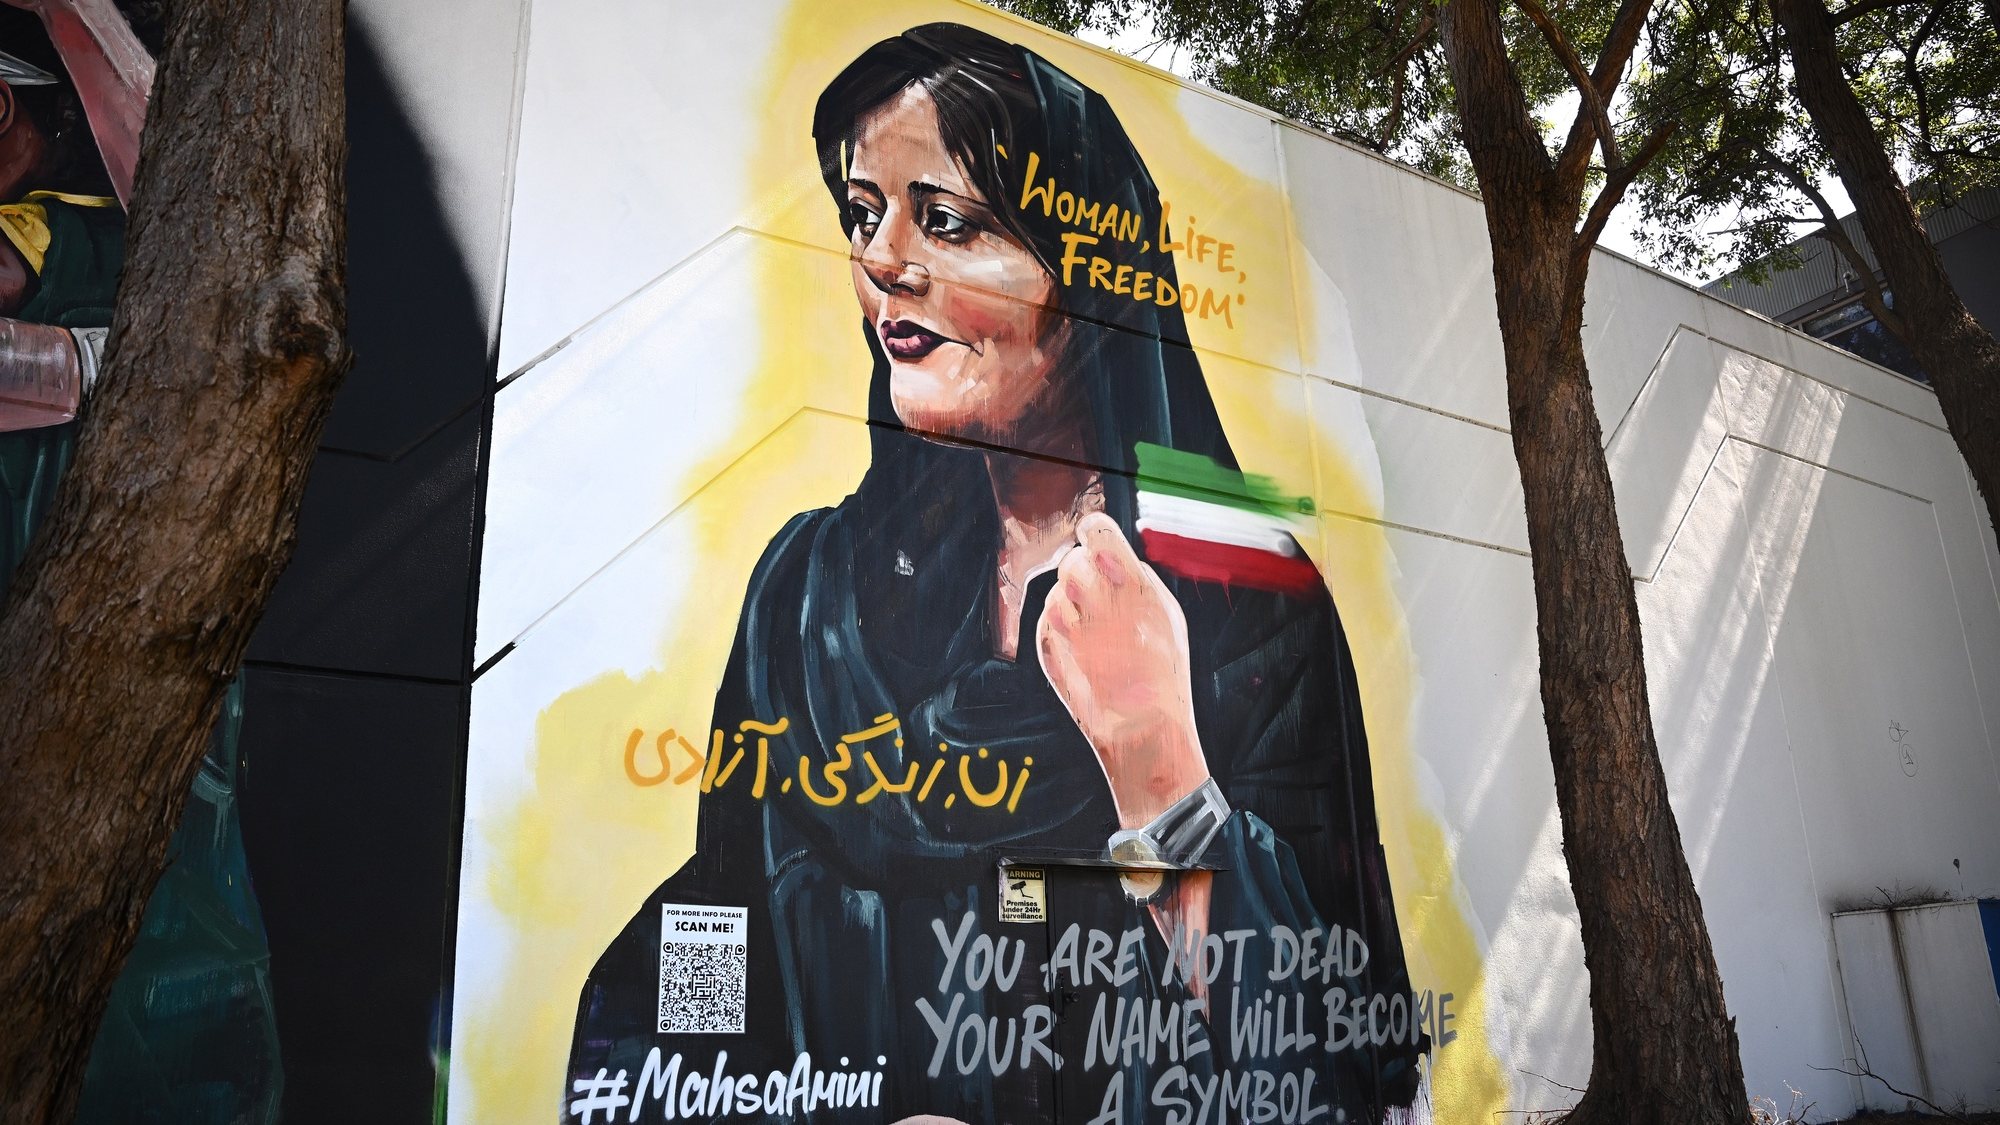 epa10270468 A mural of Mahsa Amini by artist Scott Marsh is seen in Alexandria, Sydney, Australia, 28 October 2022. Amini, a 22-year-old Iranian woman, was arrested in Tehran on 13 September by the police unit responsible for enforcing Iran&#039;s strict dress code for women. She fell into a coma while in police custody and was declared dead on 16 September.  EPA/DAN HIMBRECHTS AUSTRALIA AND NEW ZEALAND OUT